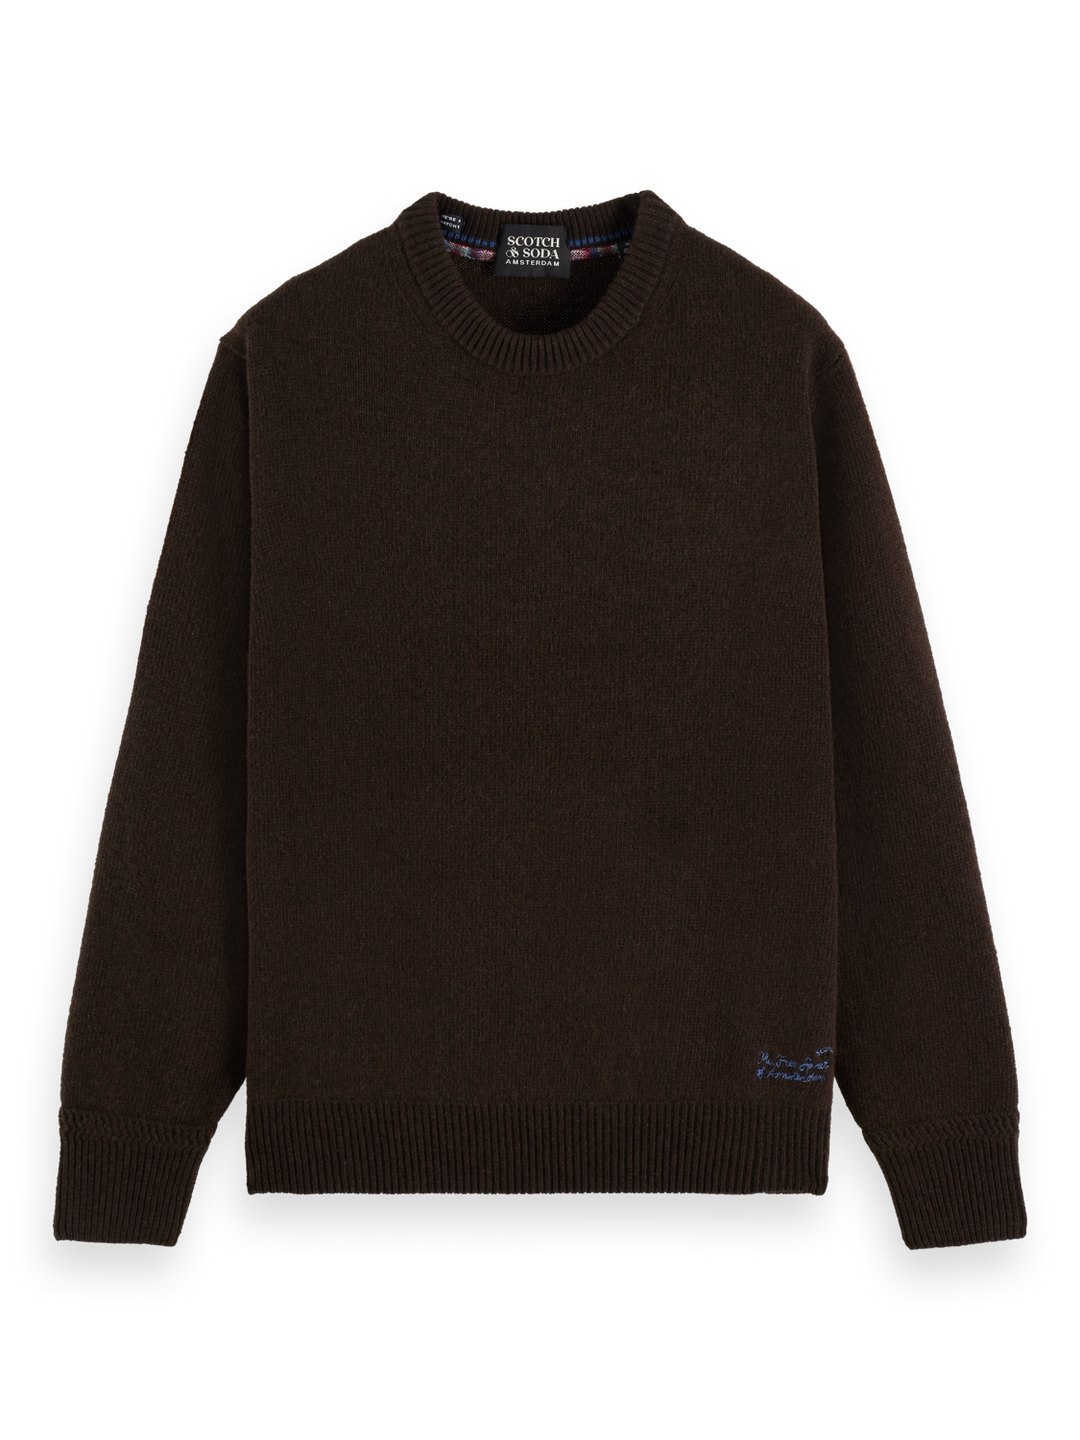 Recycled Wool Crewneck Sweater in Earth Melange | Buster McGee